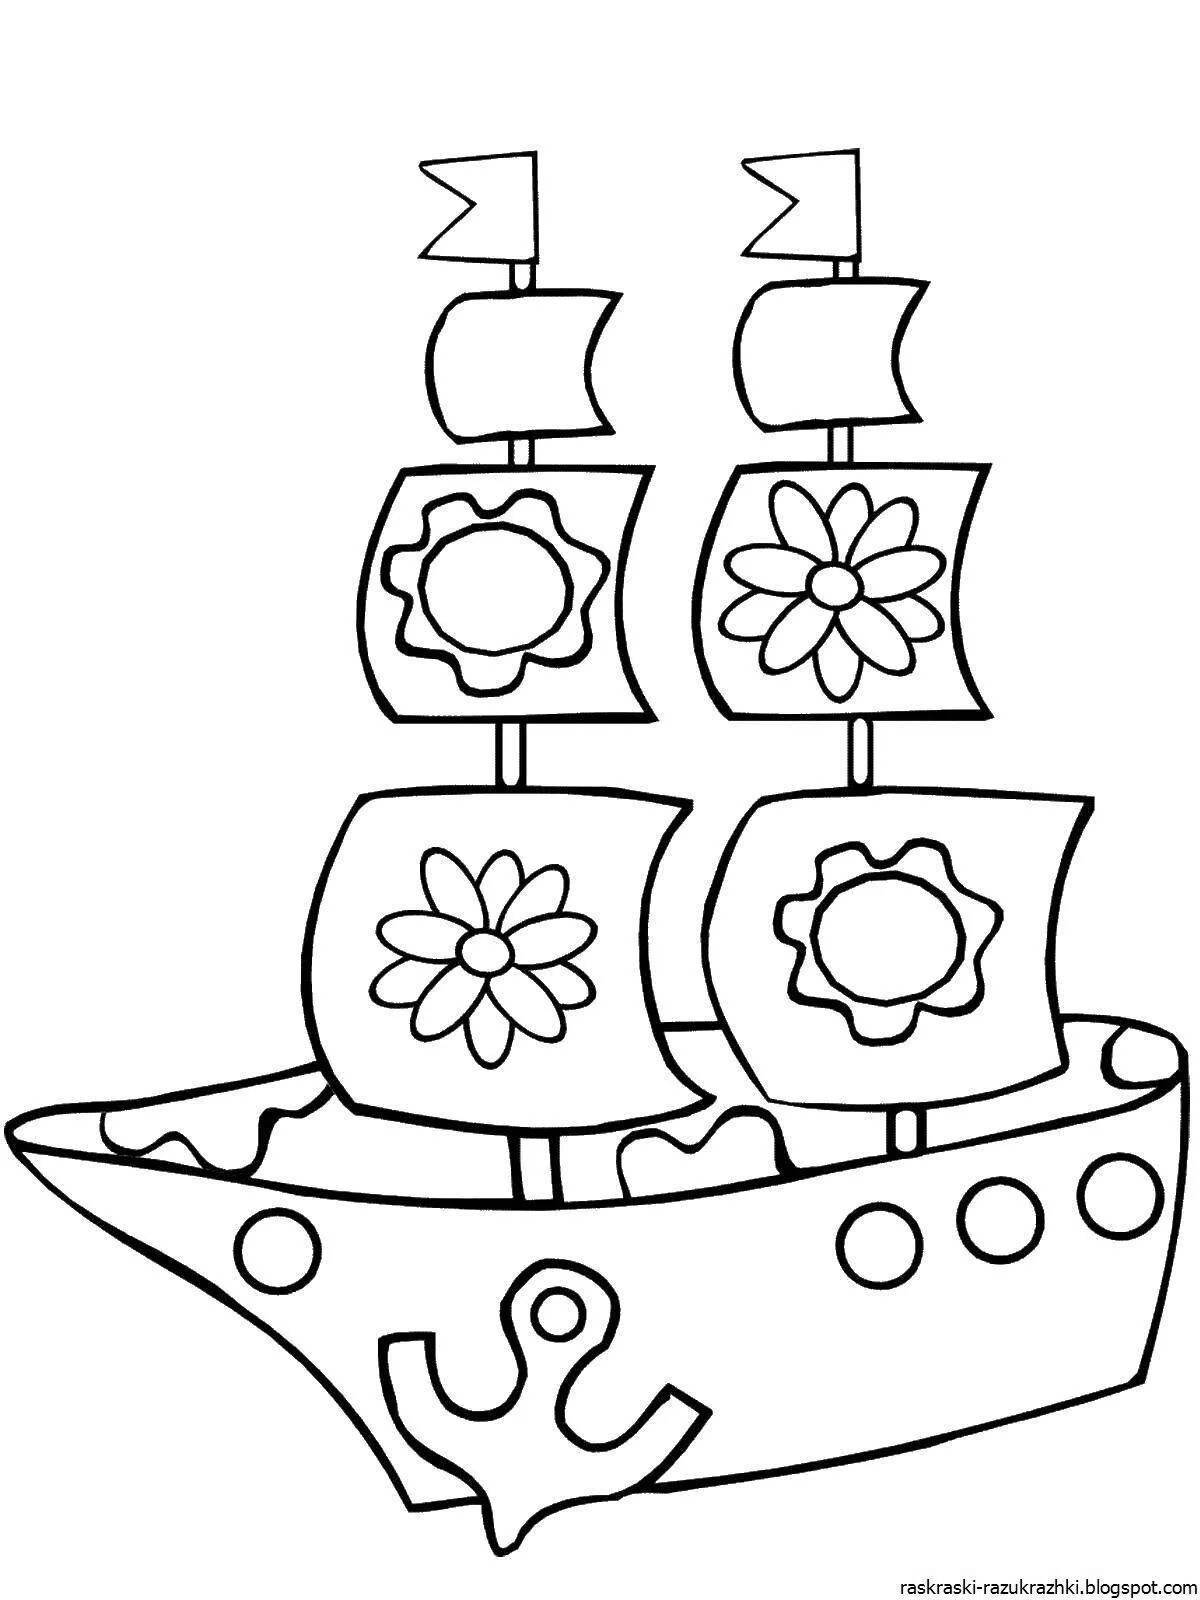 Cute ship coloring book for 7 year olds